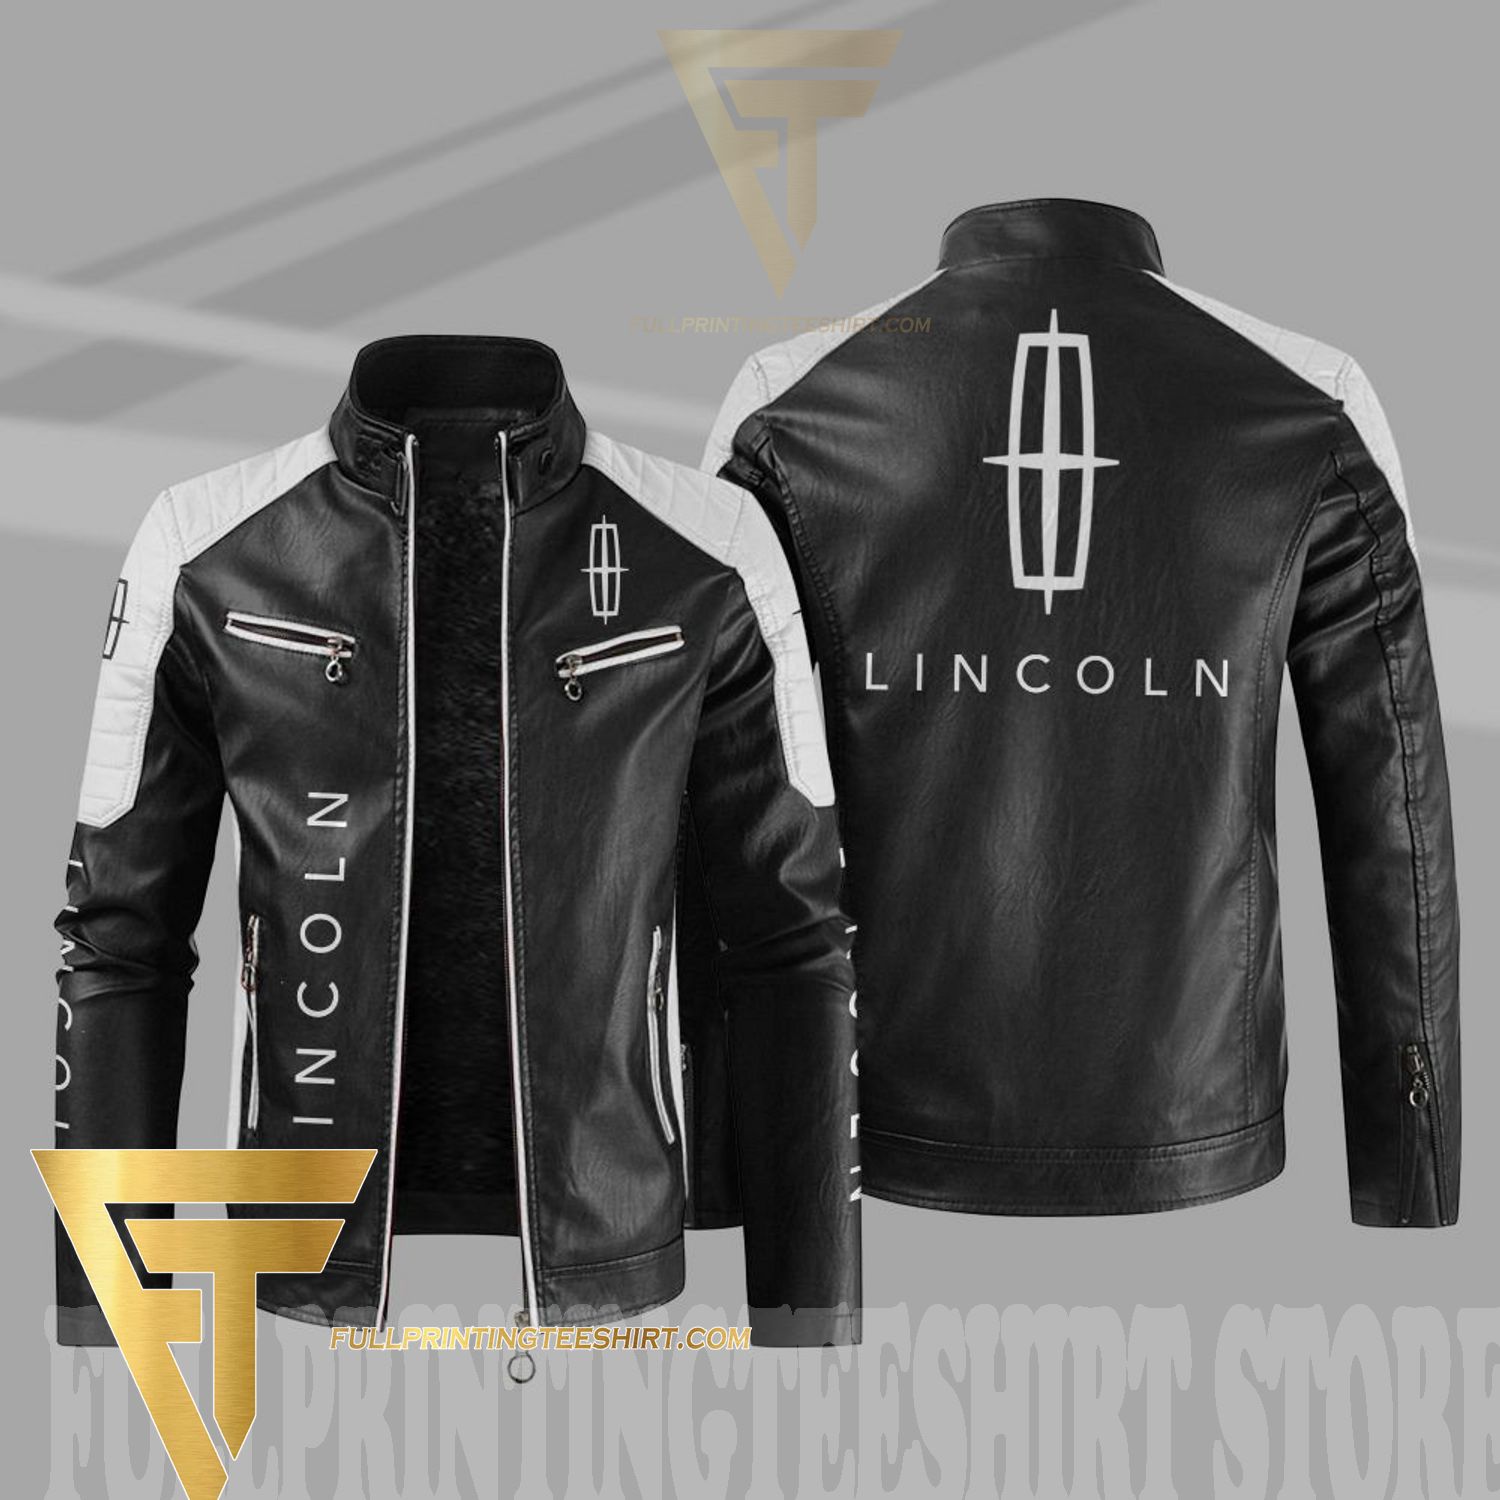 Lincoln item] Top-selling Car Print Over All Symbol Jacket